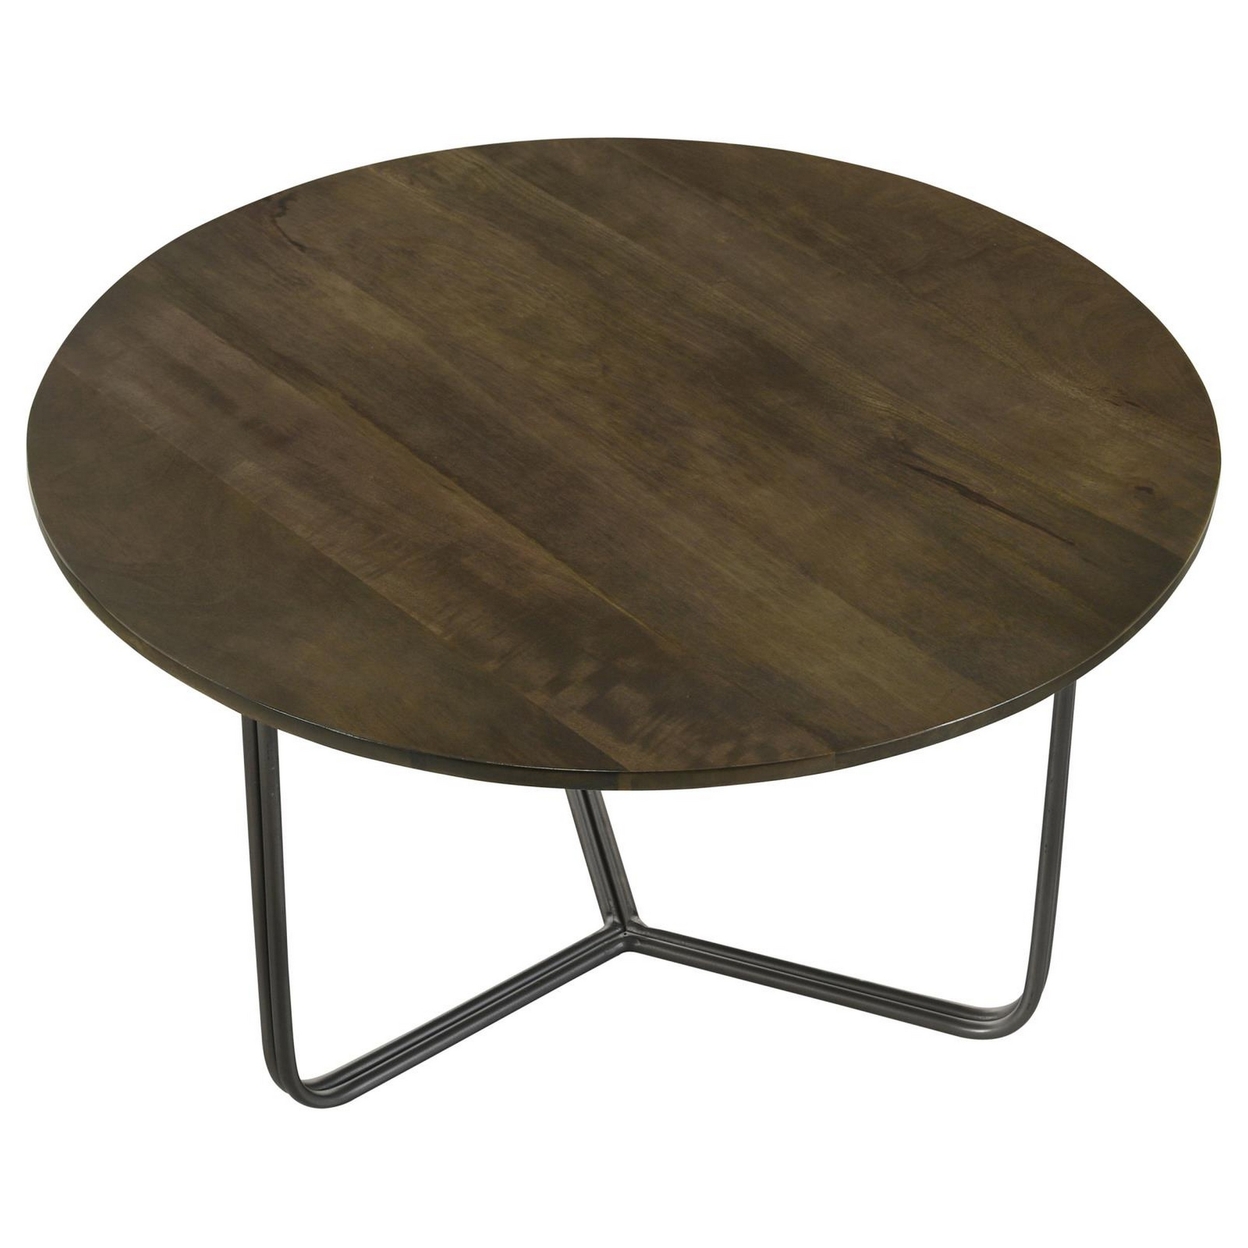 30 Inch Wood Round Accent Coffee Table With Triangular Base, Brown, Black- Saltoro Sherpi